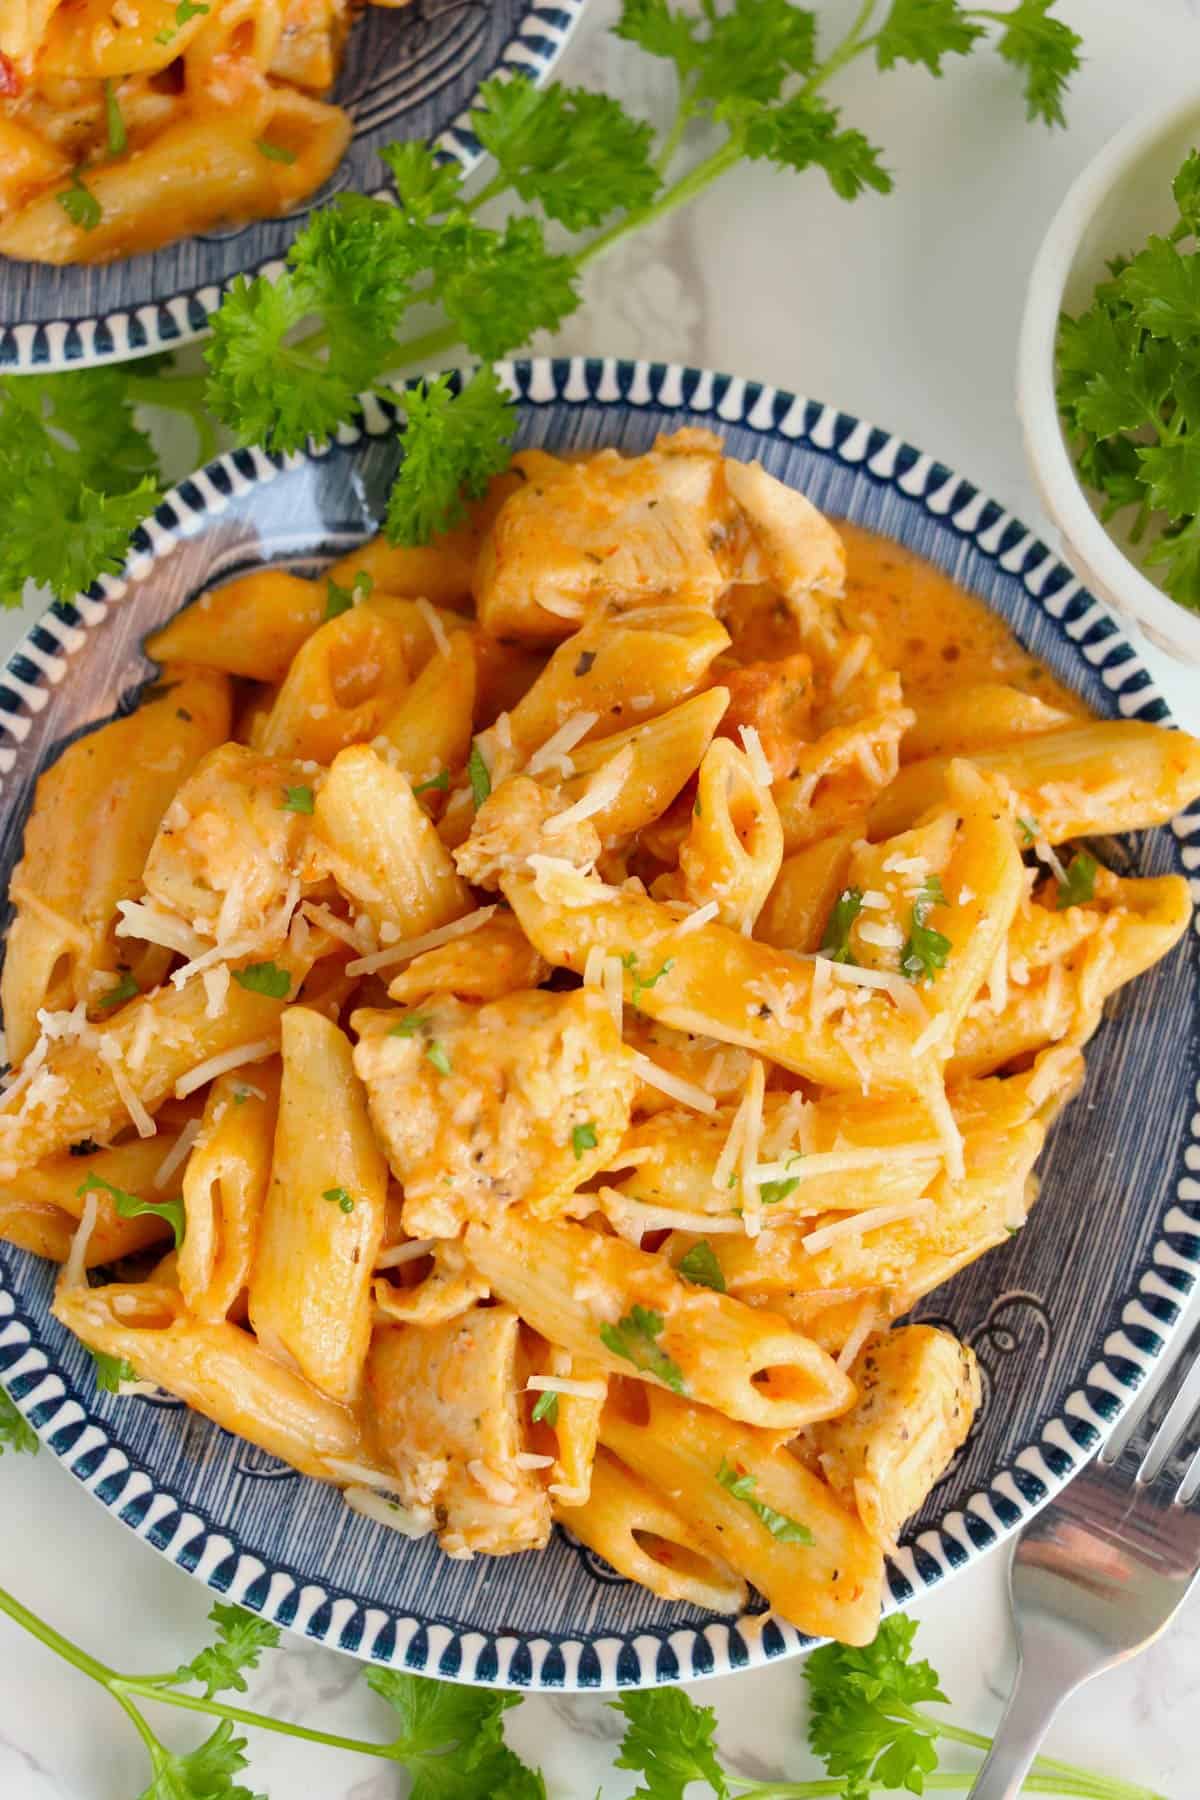 A bowl of chicken and penne pasta with parmesan sprinkled on top.